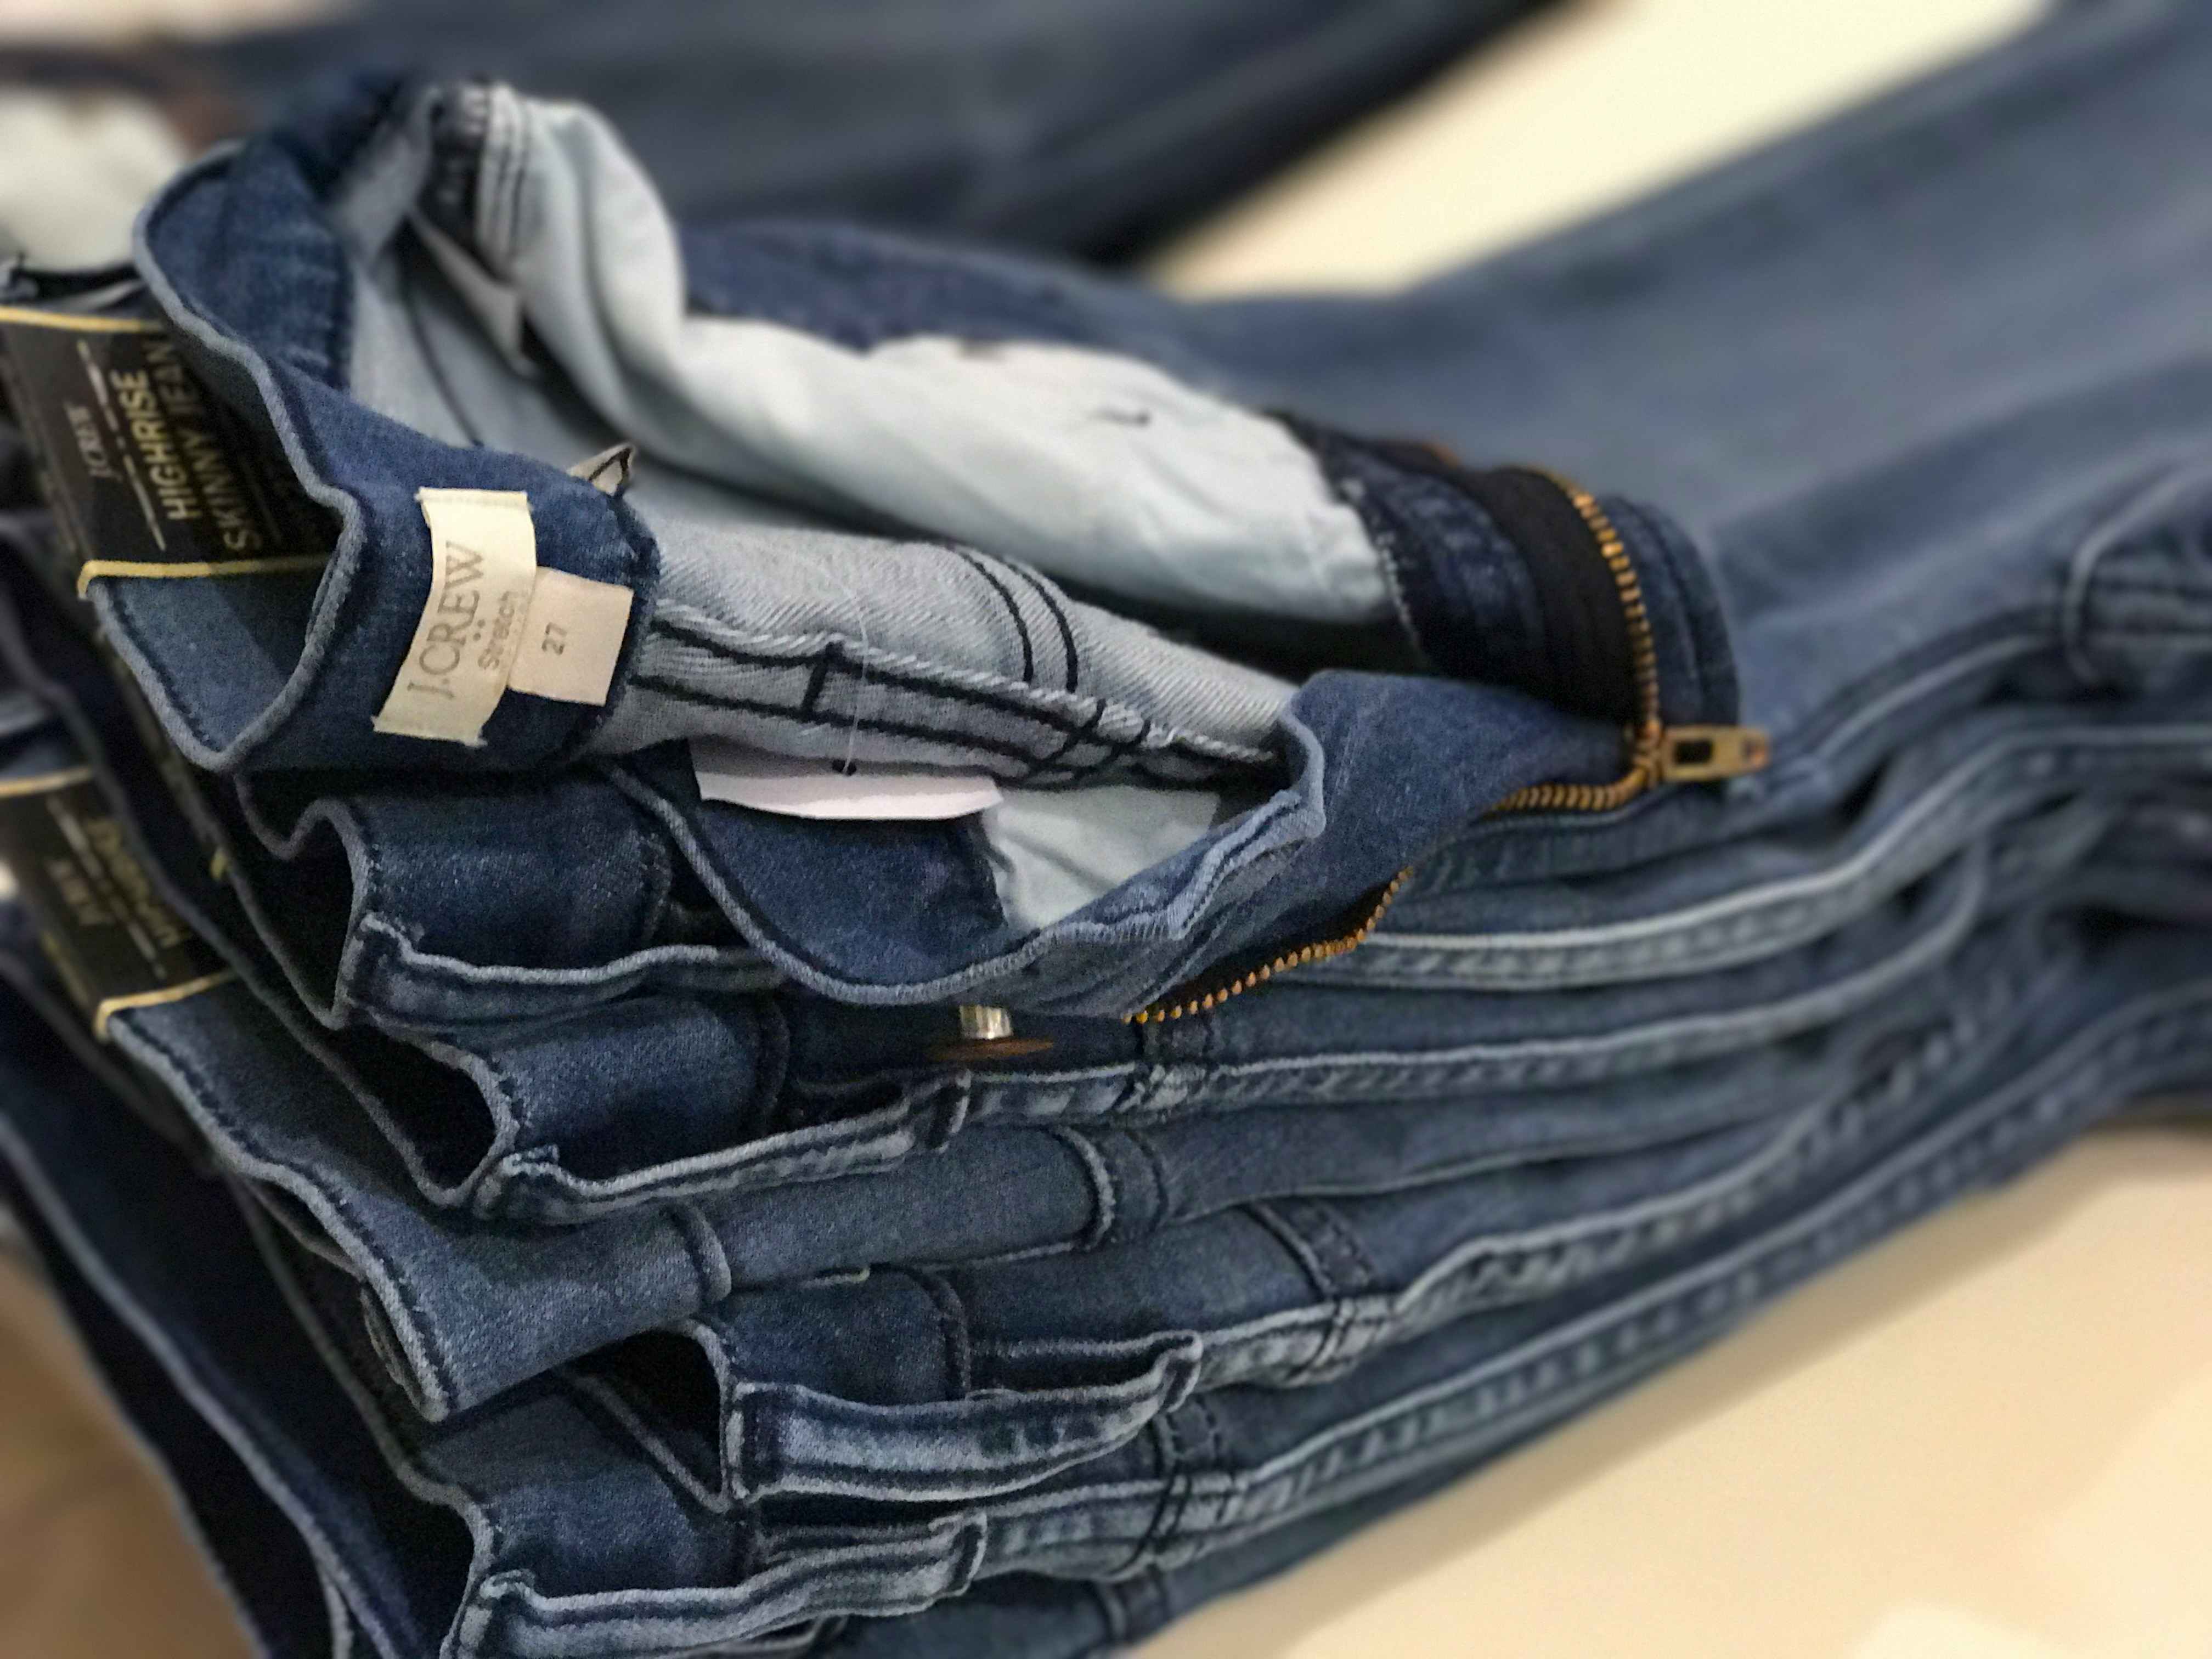 9. Get J.Crew Mercantile jeans when they reach 60% off during the holidays.